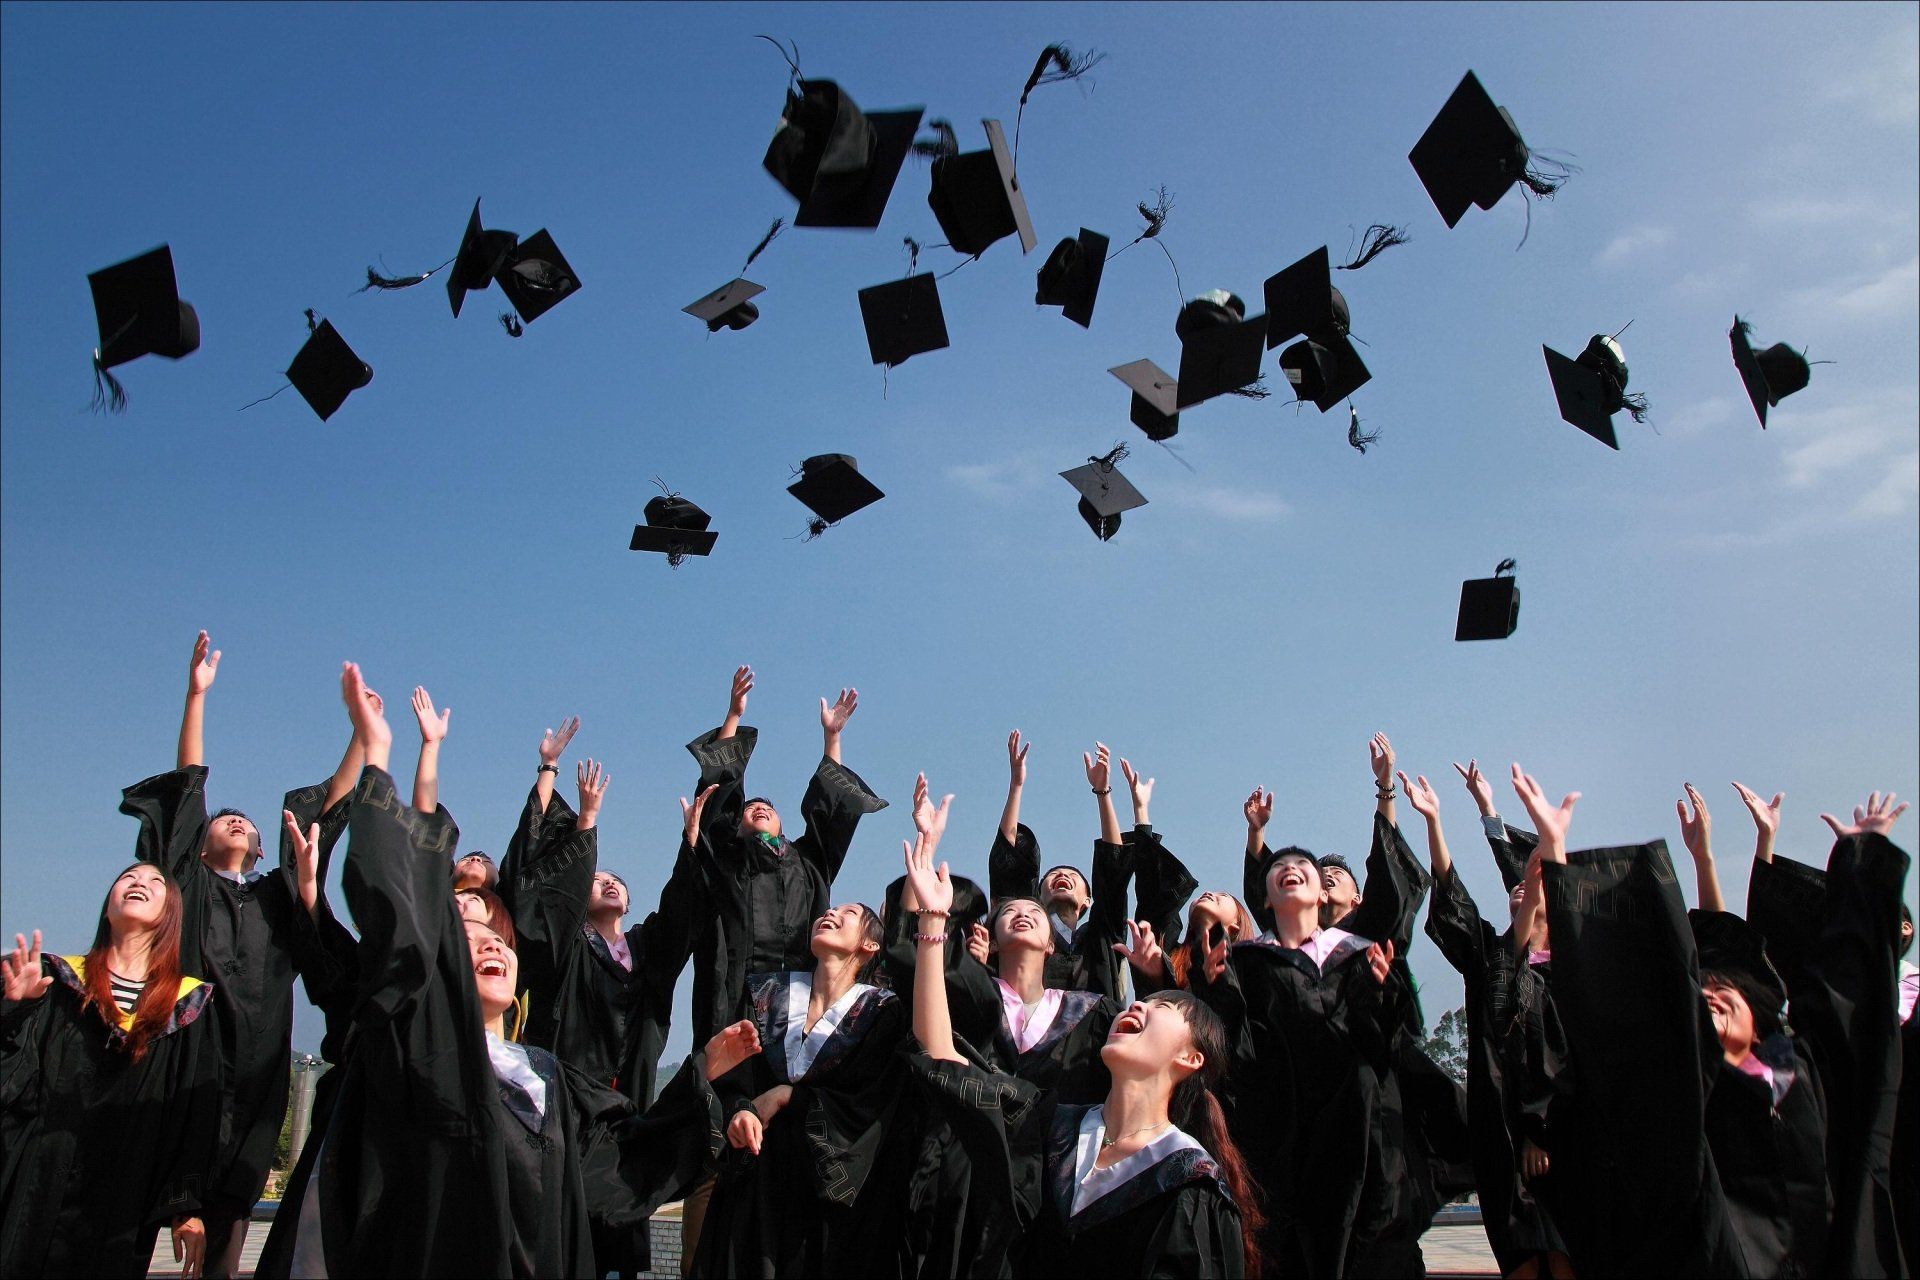 A group of university graduates are throwing their caps in the air.